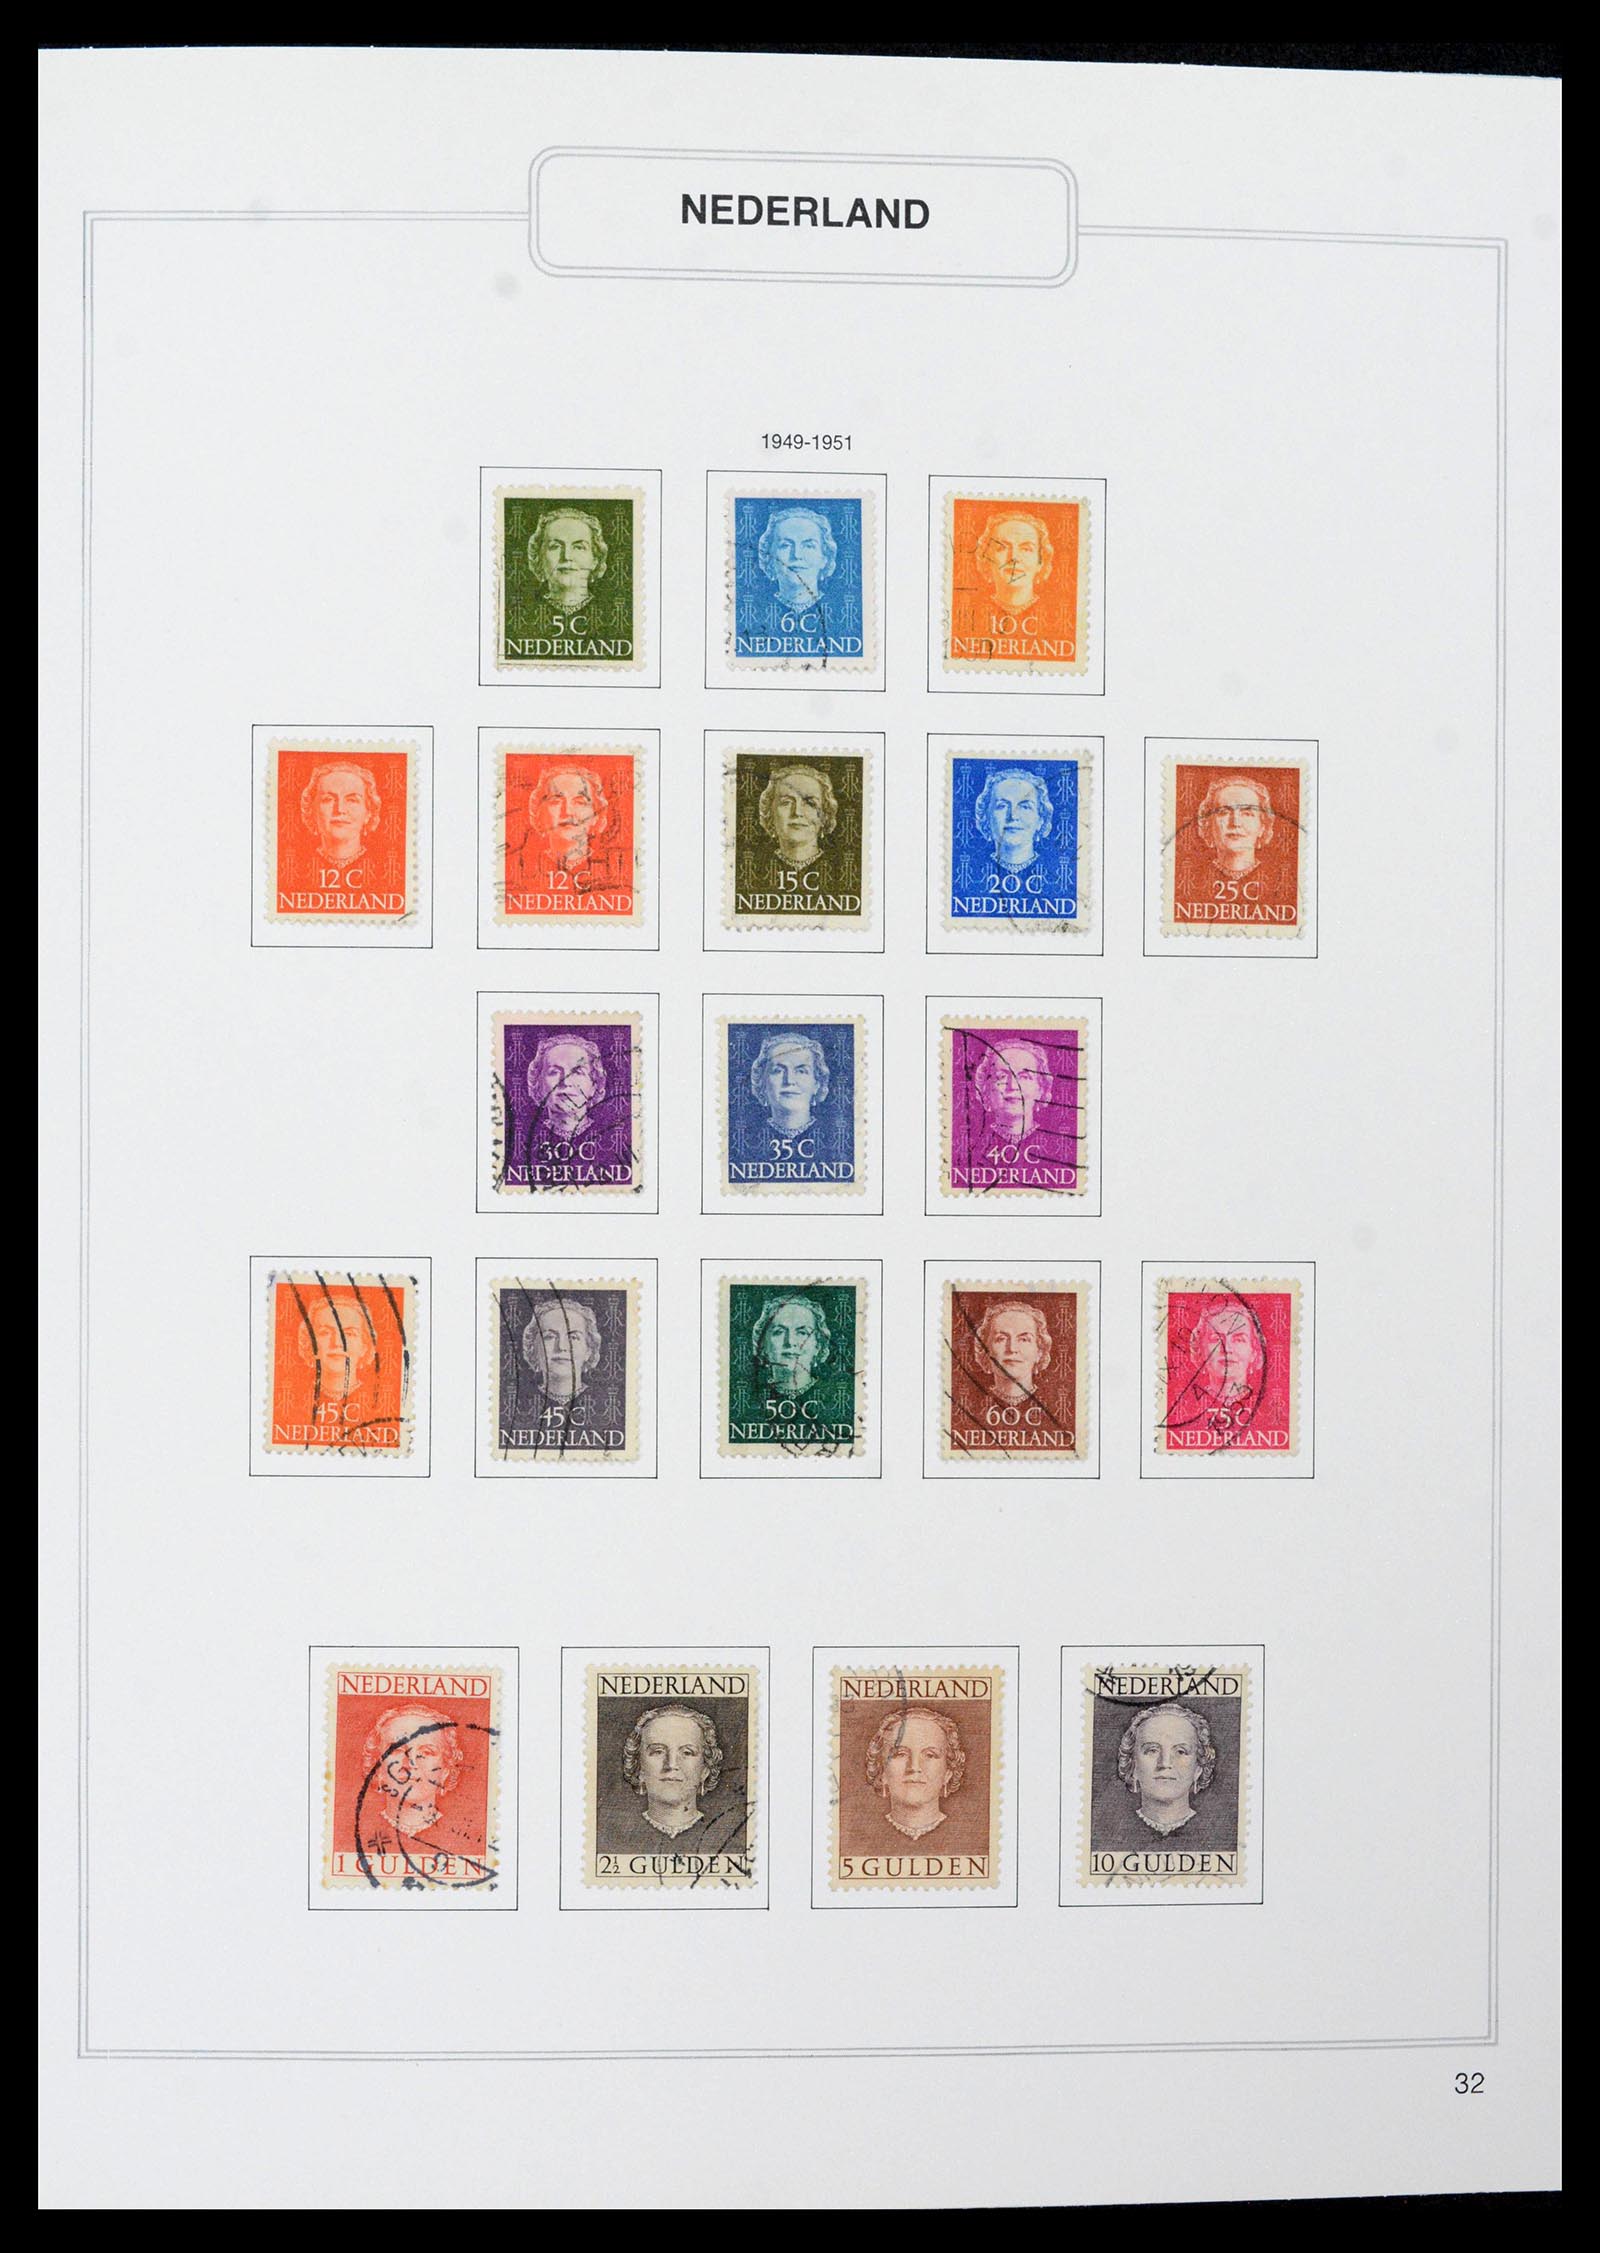 39261 0032 - Stamp collection 39261 Netherlands 1852-2015.